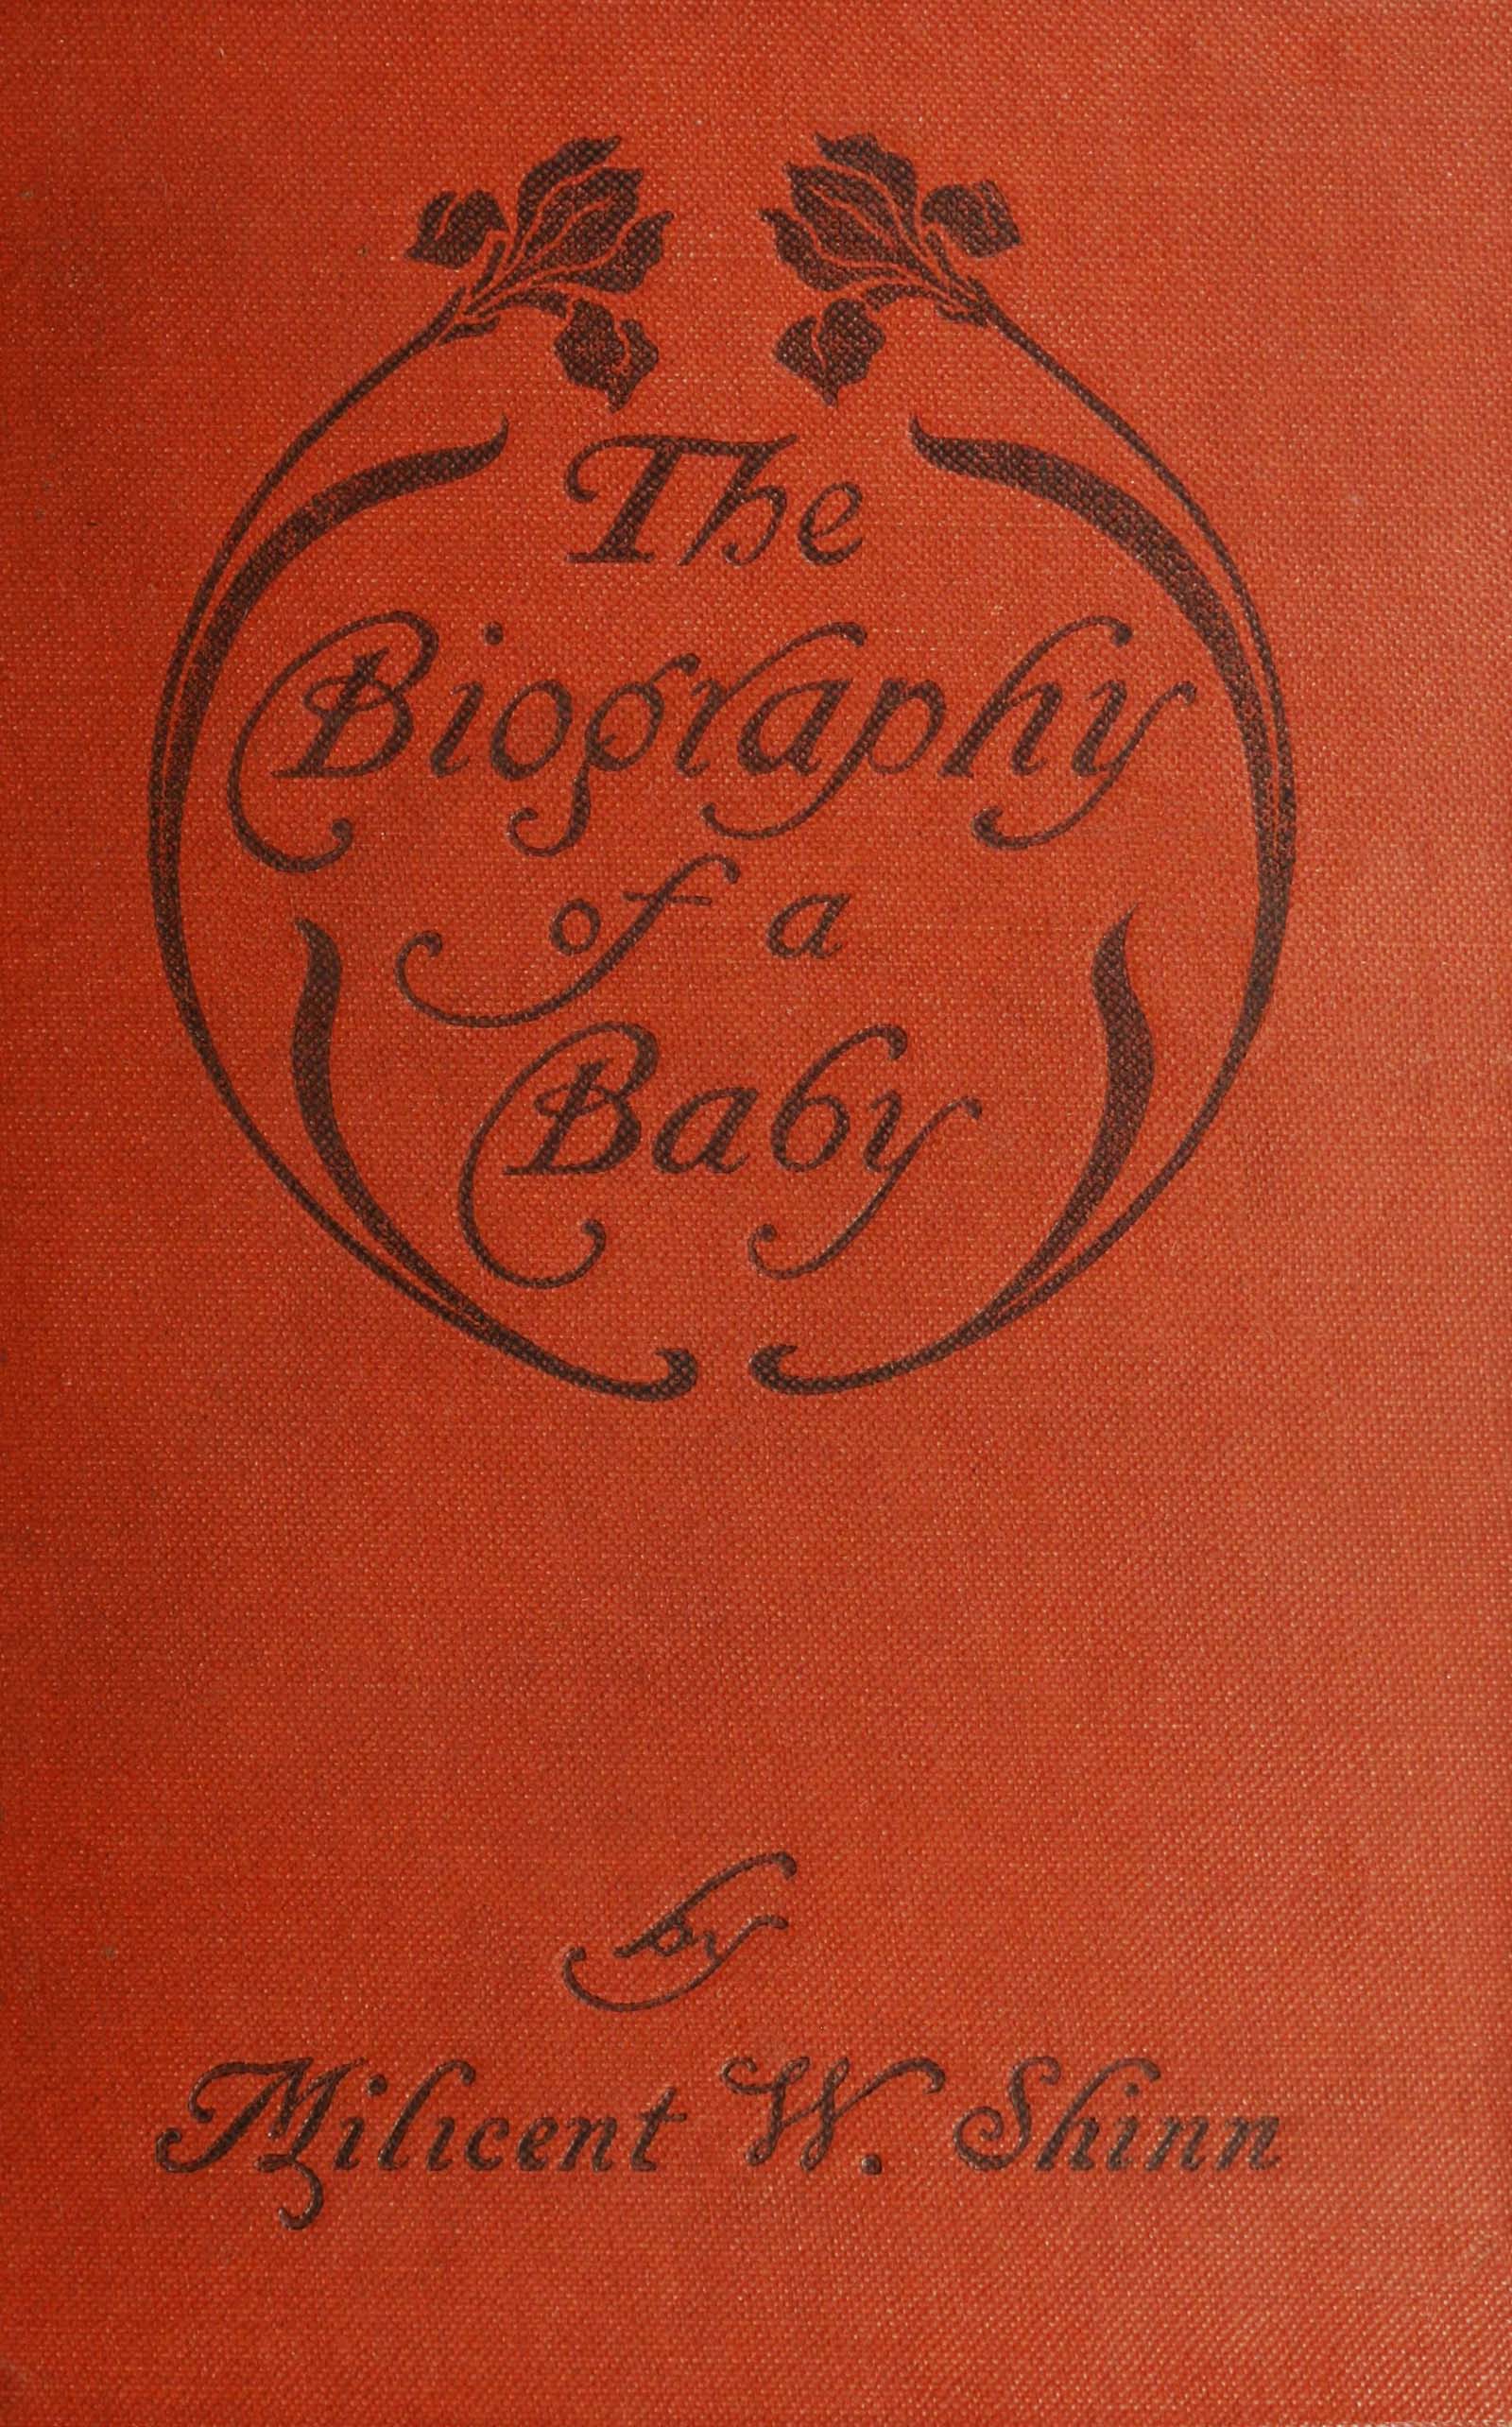 The biography of a baby